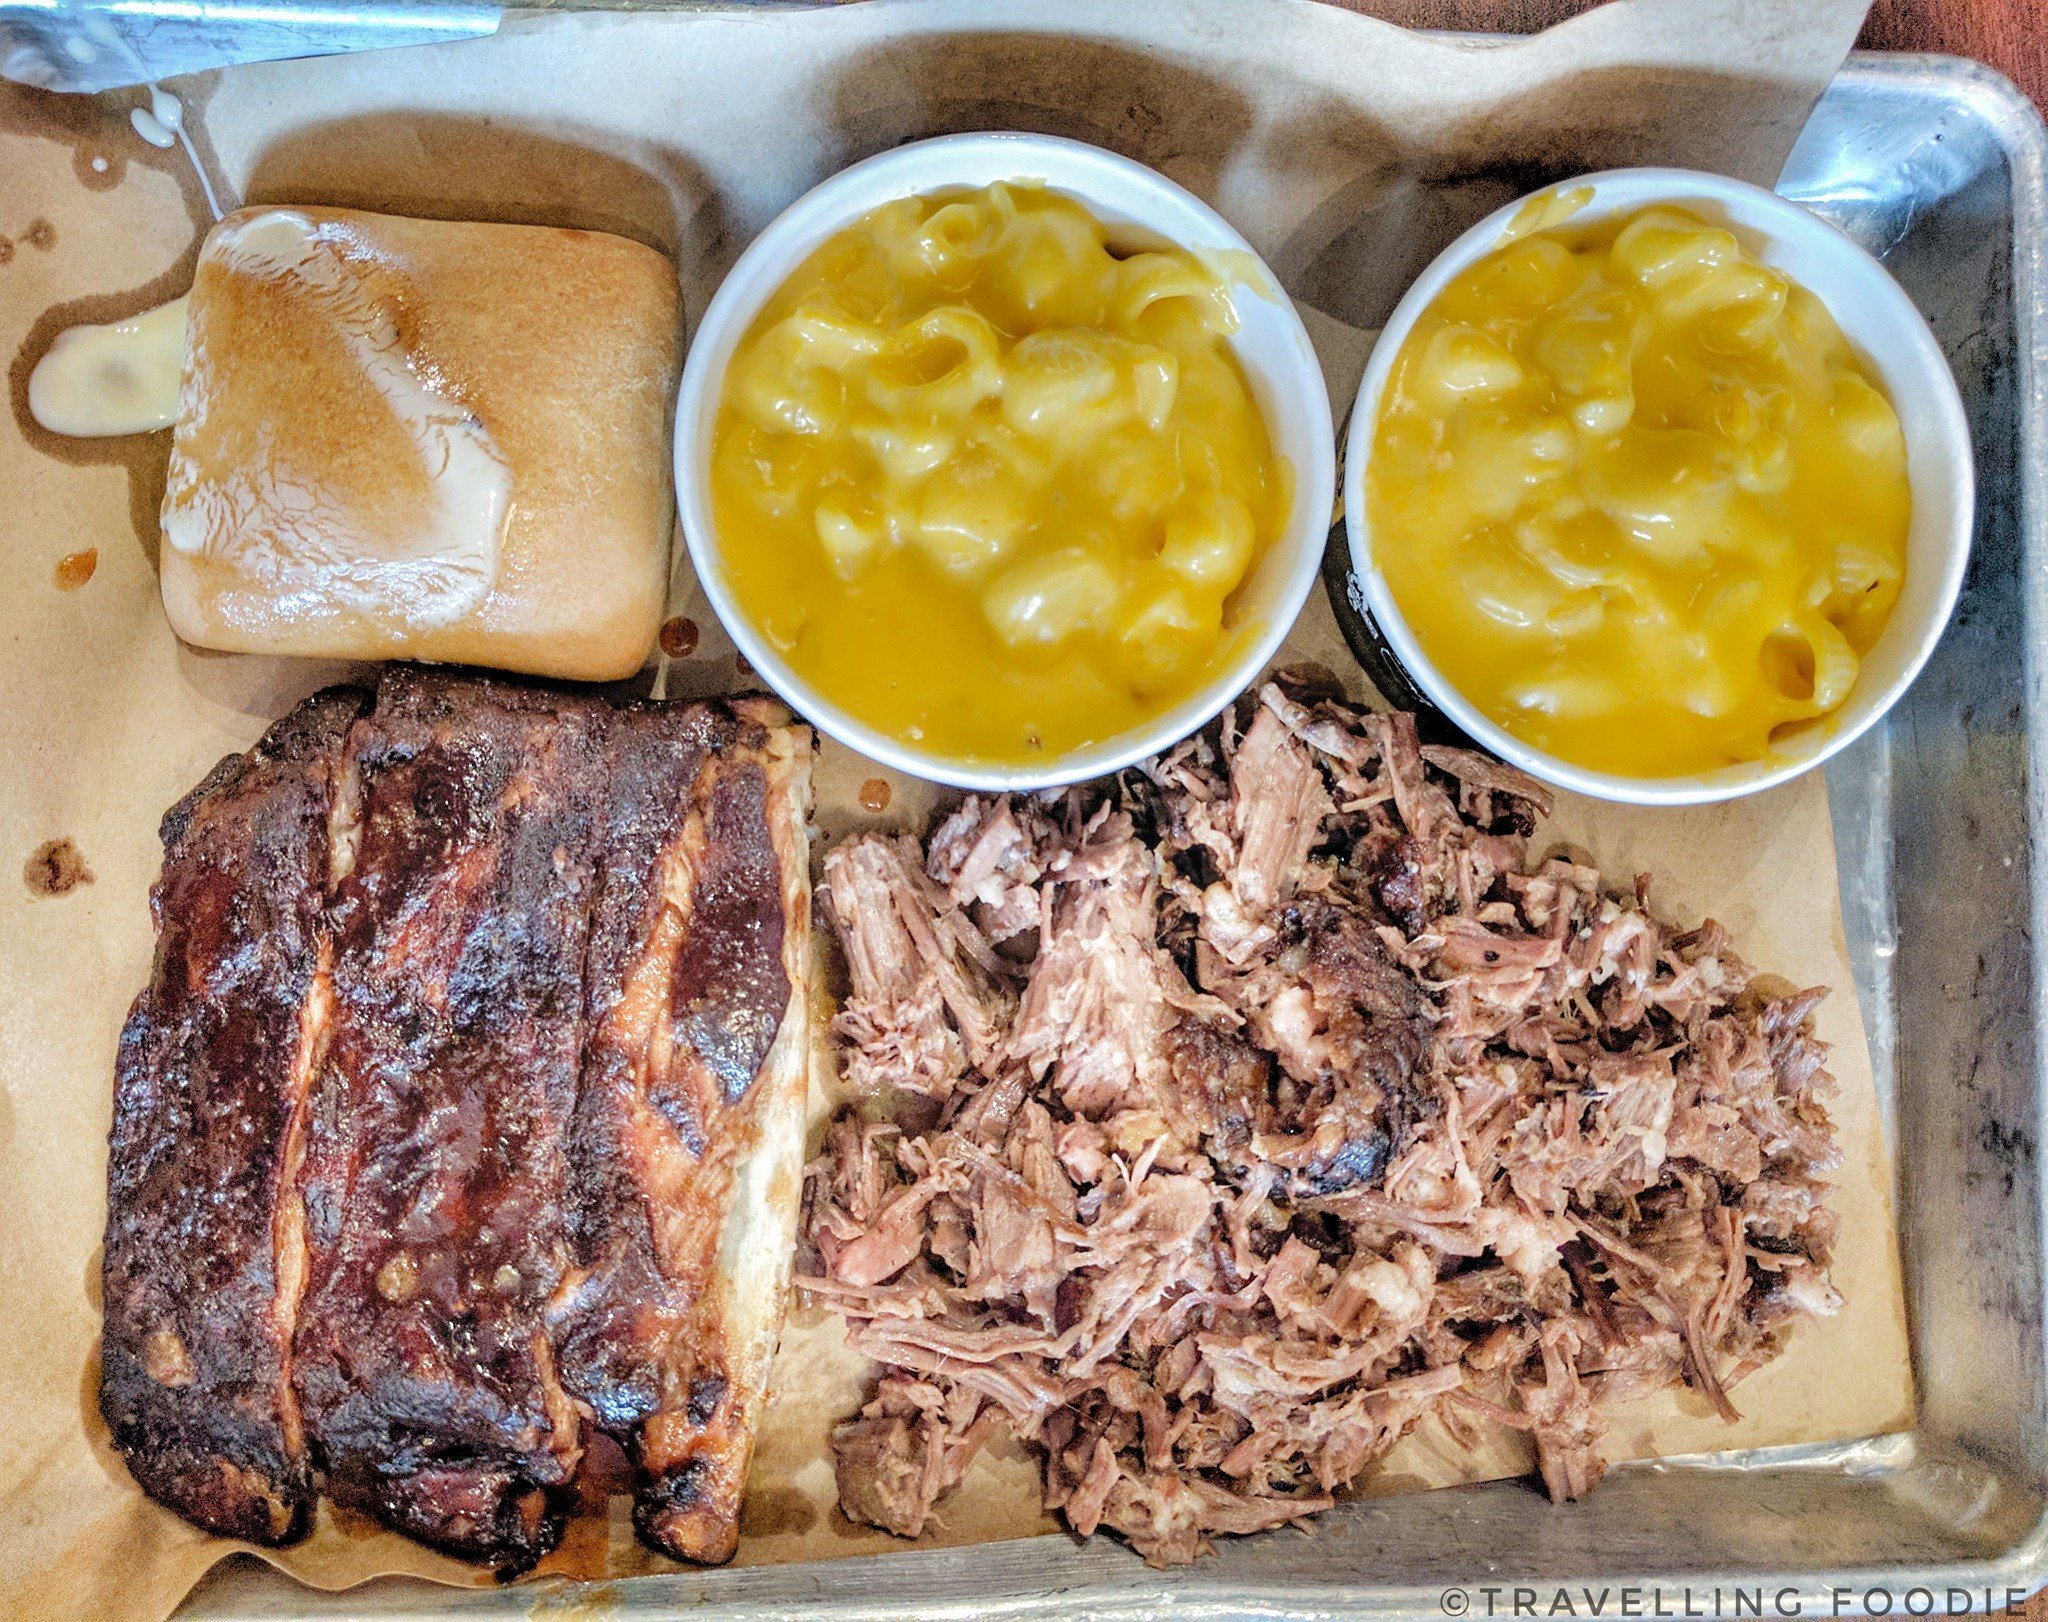 Travelling Foodie Eats At Dickey's Barbecue Pit in Redondo Beach California